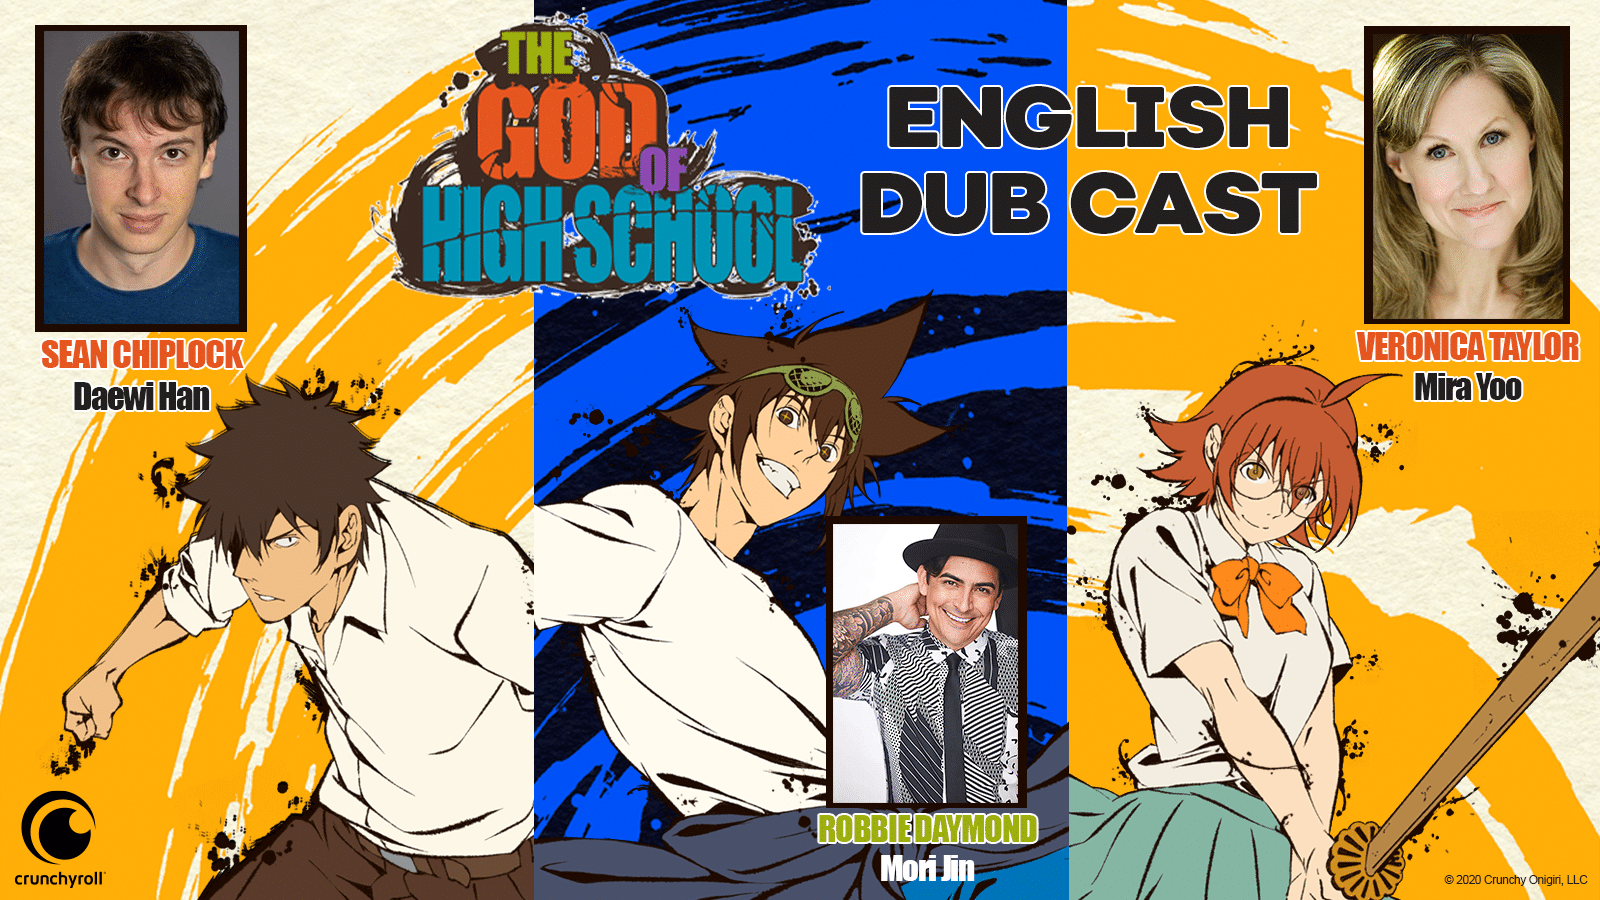 Interviews with the English Voice Cast of The God of High School